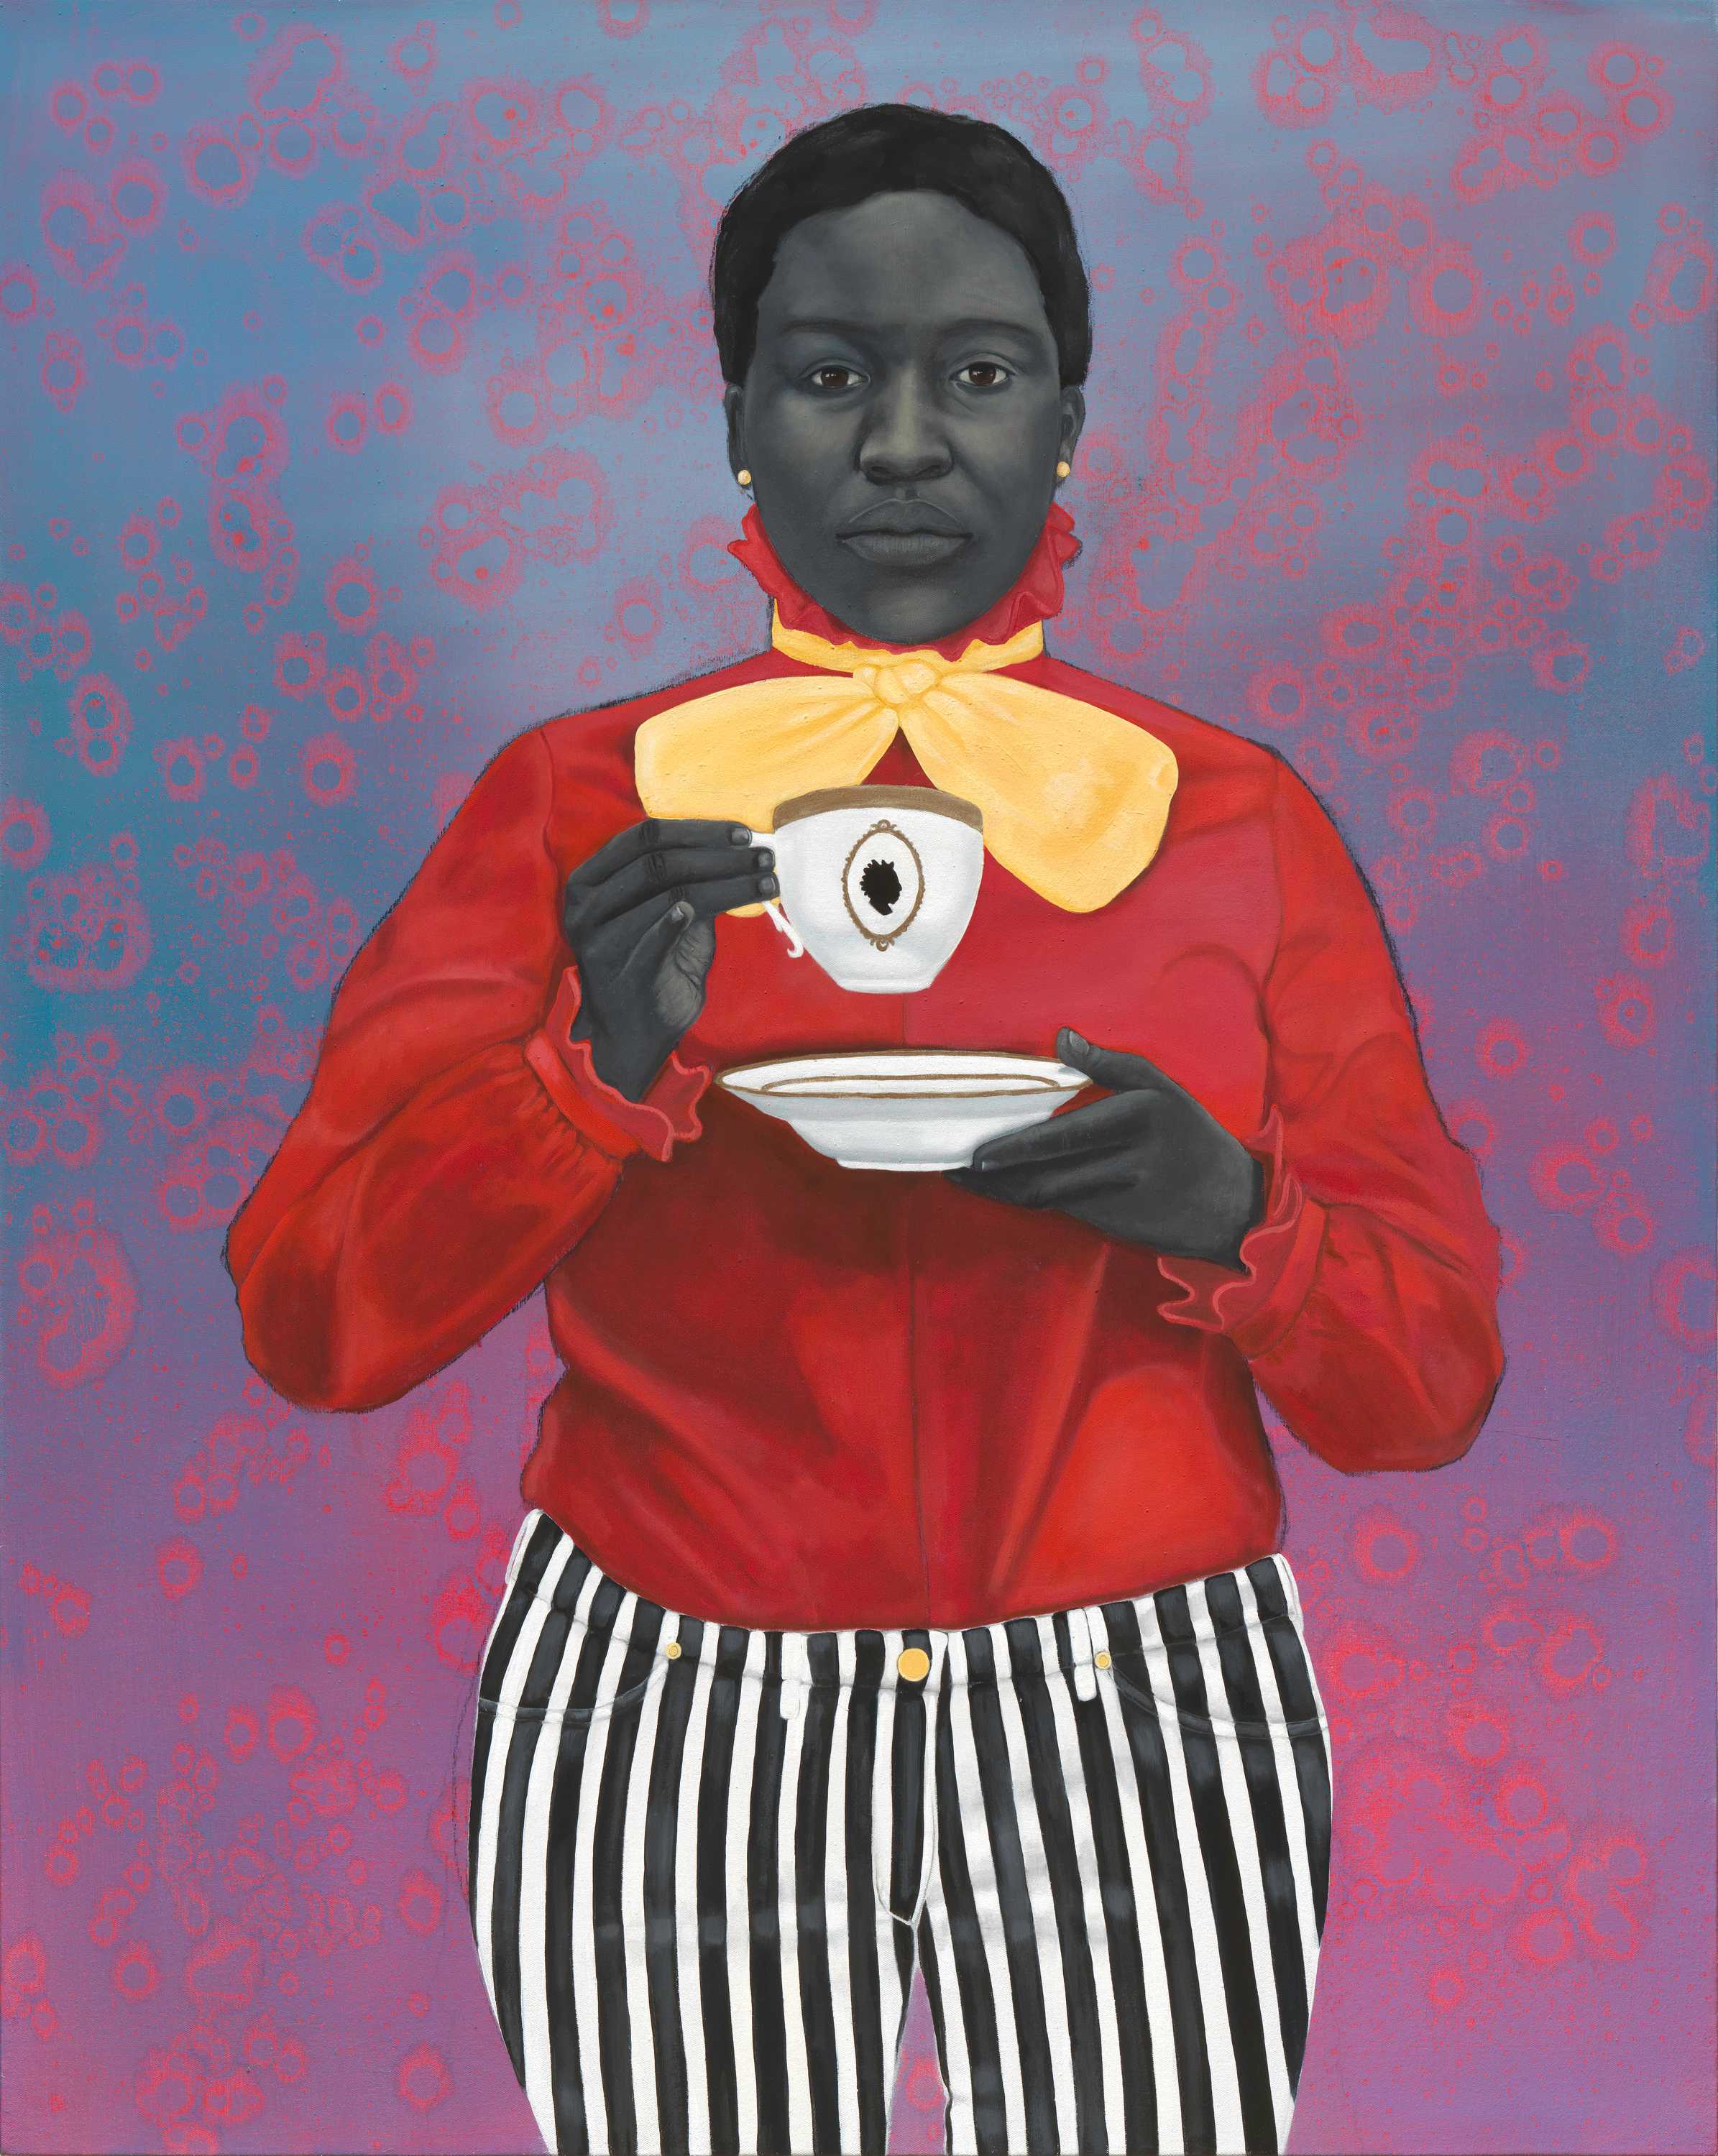 Three quarter length oil painting portrait of a woman with closely cropped hair holding a teacup and saucer decorated.  She is dressed in a high necked red blouse with a yellow scarf. She also wears a black and white stiped pants.